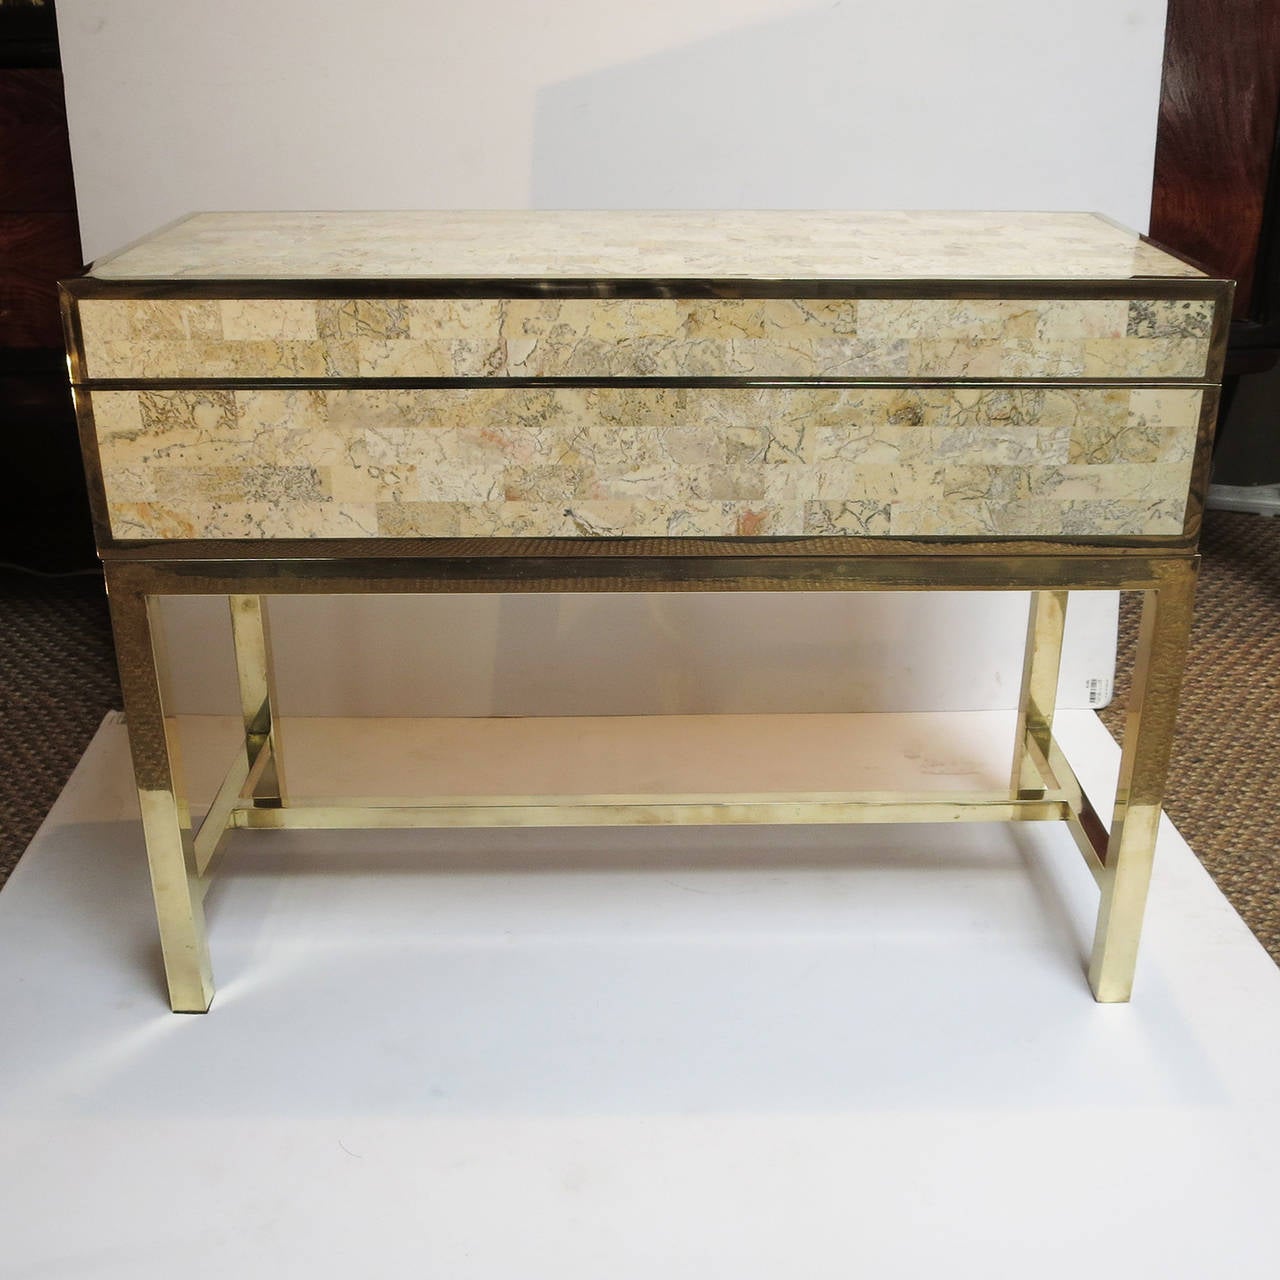 This wonderful cabinet can be placed anywhere as an occasional table or small side table. The lid hinges open to reveal an open box, lined in polished mahogany. All edges are finished in brass, and sits on a solid brass base. We have done a light